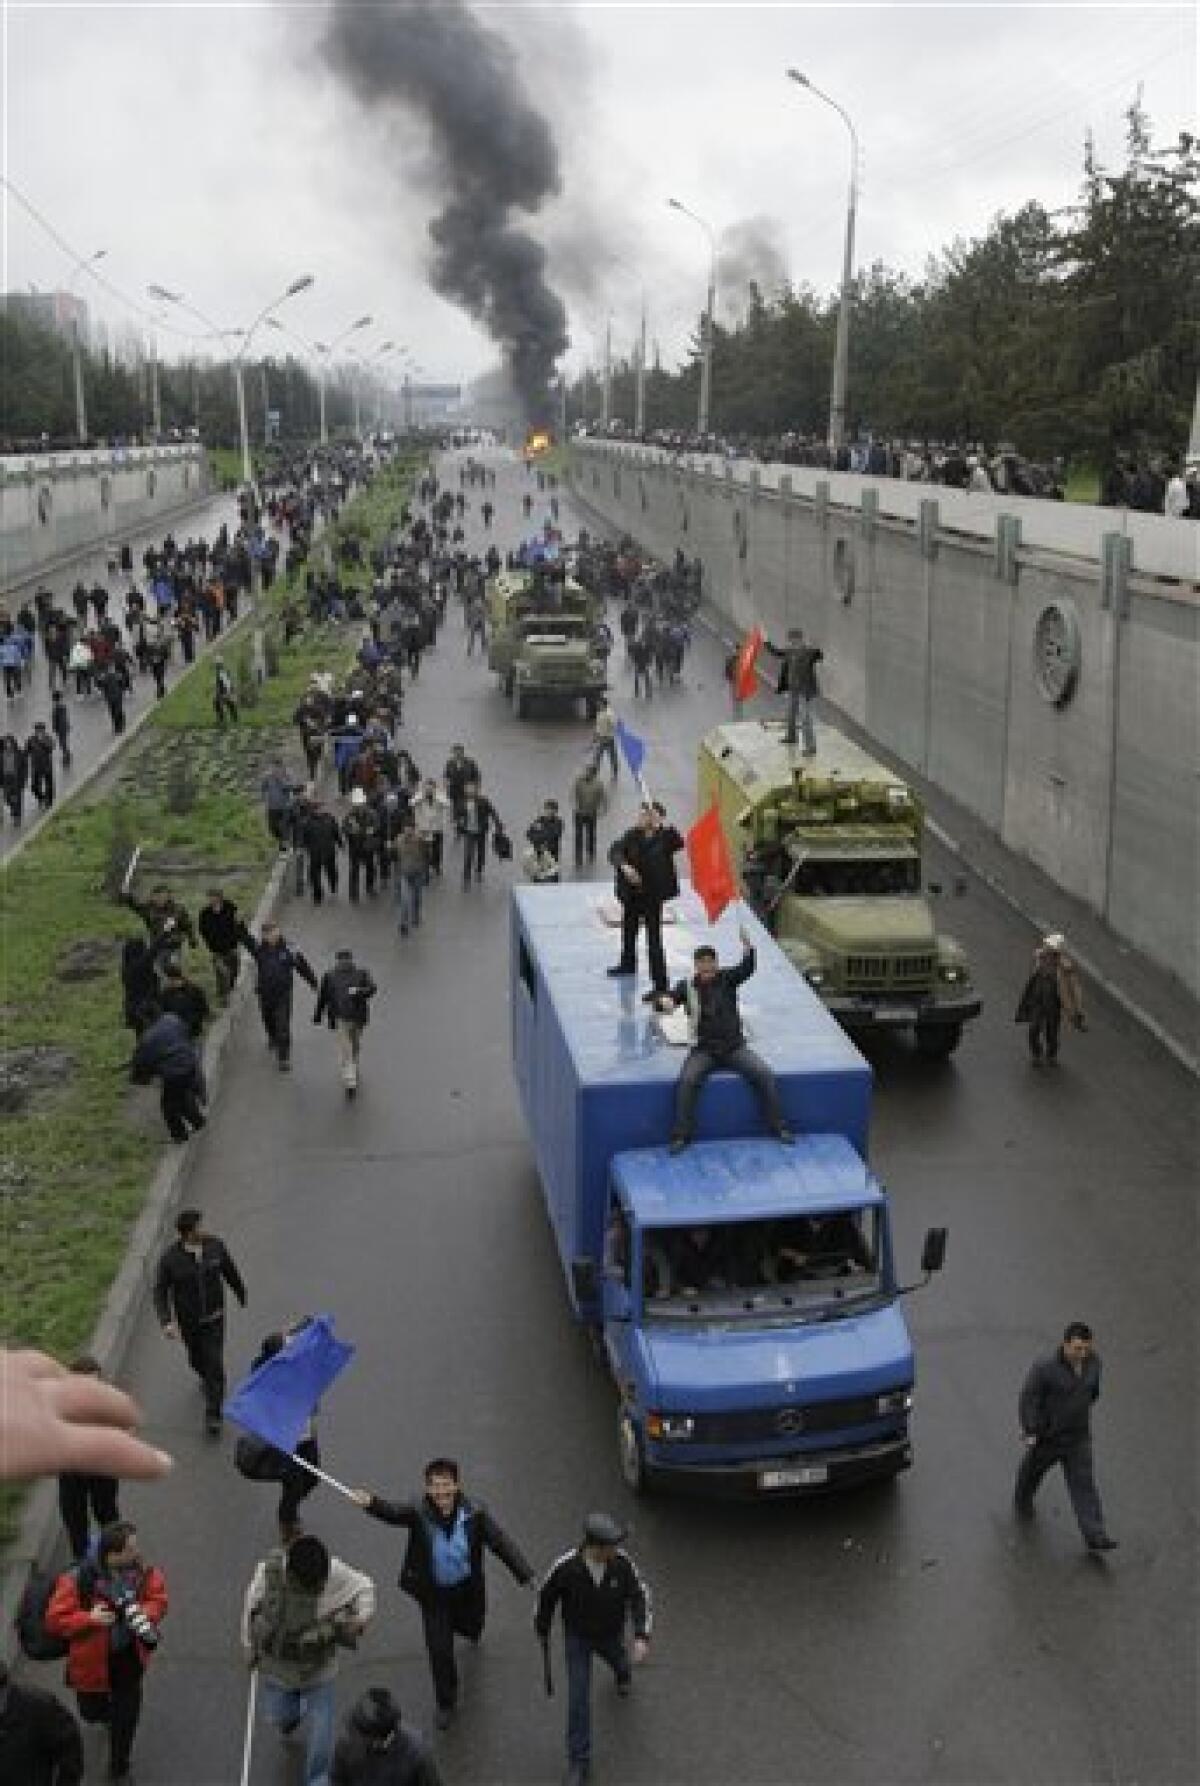 Kyrgyz protesters waving the national flag, ride on a truck in Bishkek, Kyrgyzstan, Wednesday, April 7, 2010. Police in Kyrgyzstan opened fire on thousands of angry protesters who tried to seize the main government building amid rioting in the capital as protests spread across the Central Asian nation. (AP Photo/Ivan Sekretarev)